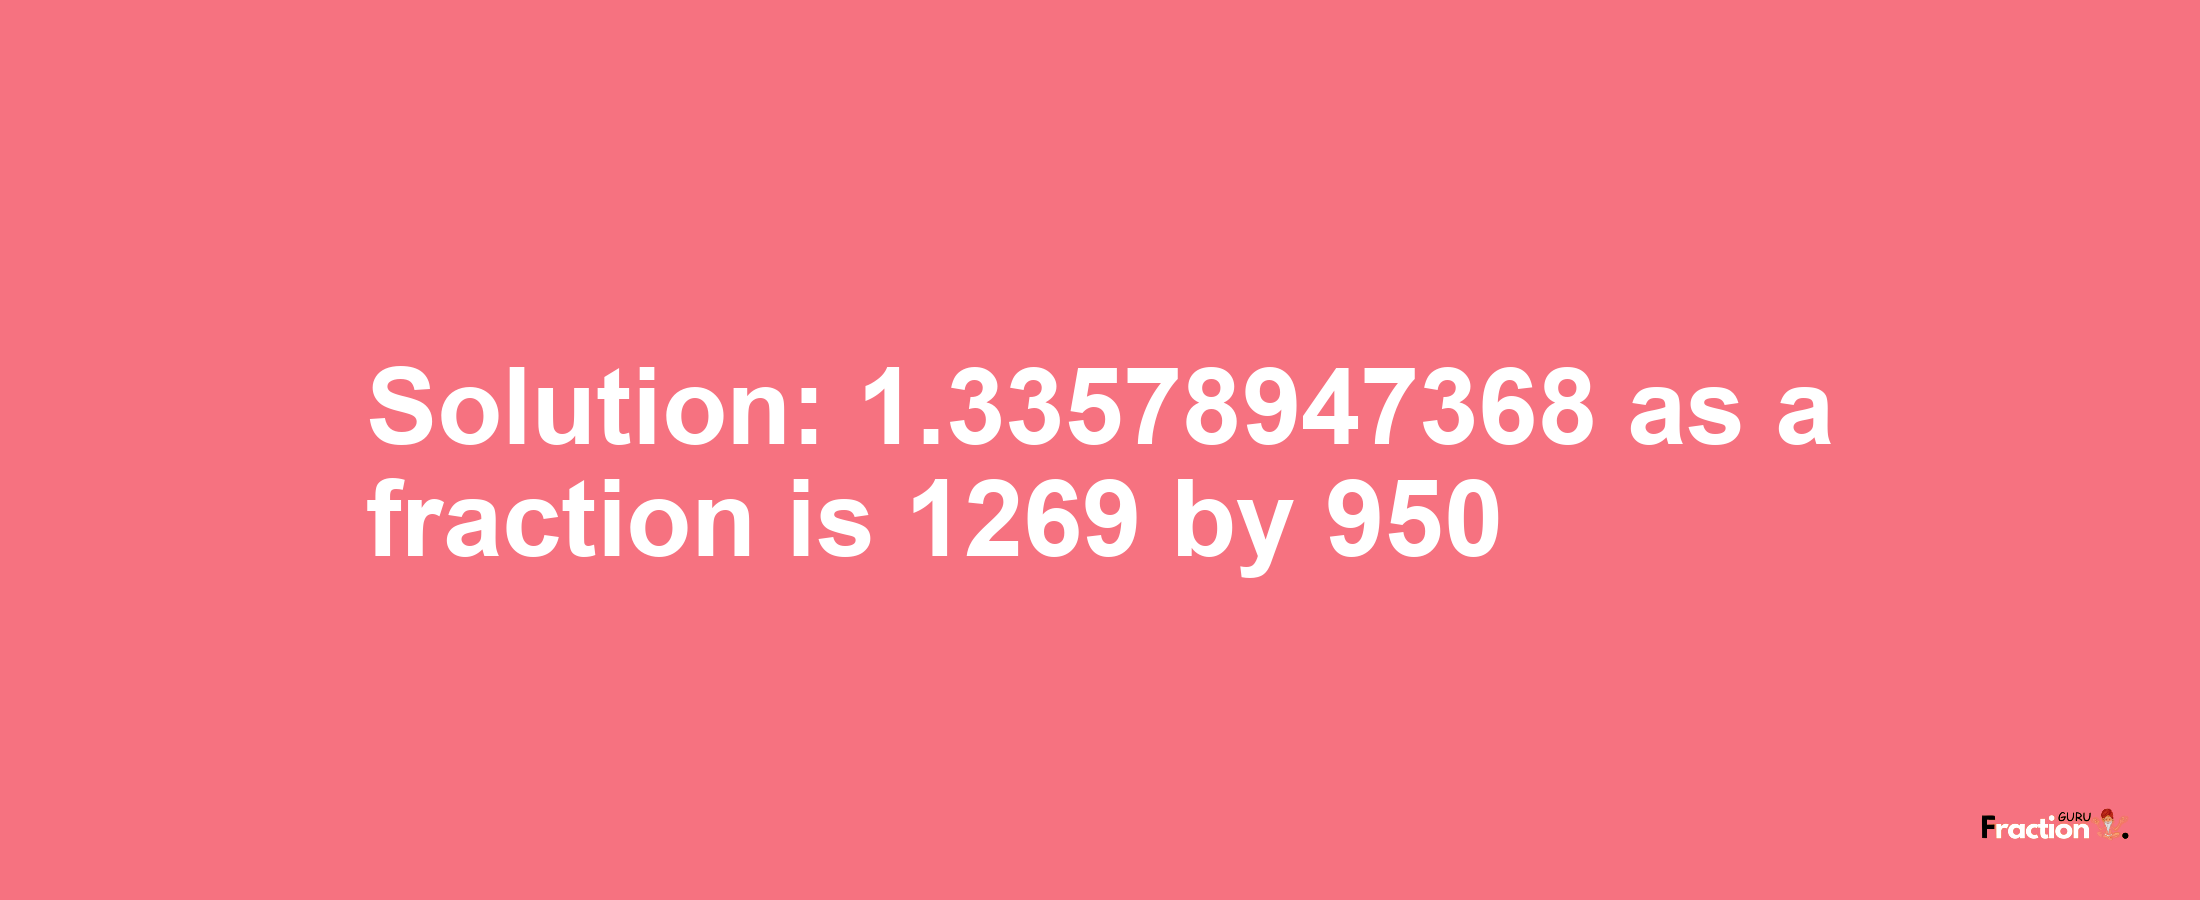 Solution:1.33578947368 as a fraction is 1269/950